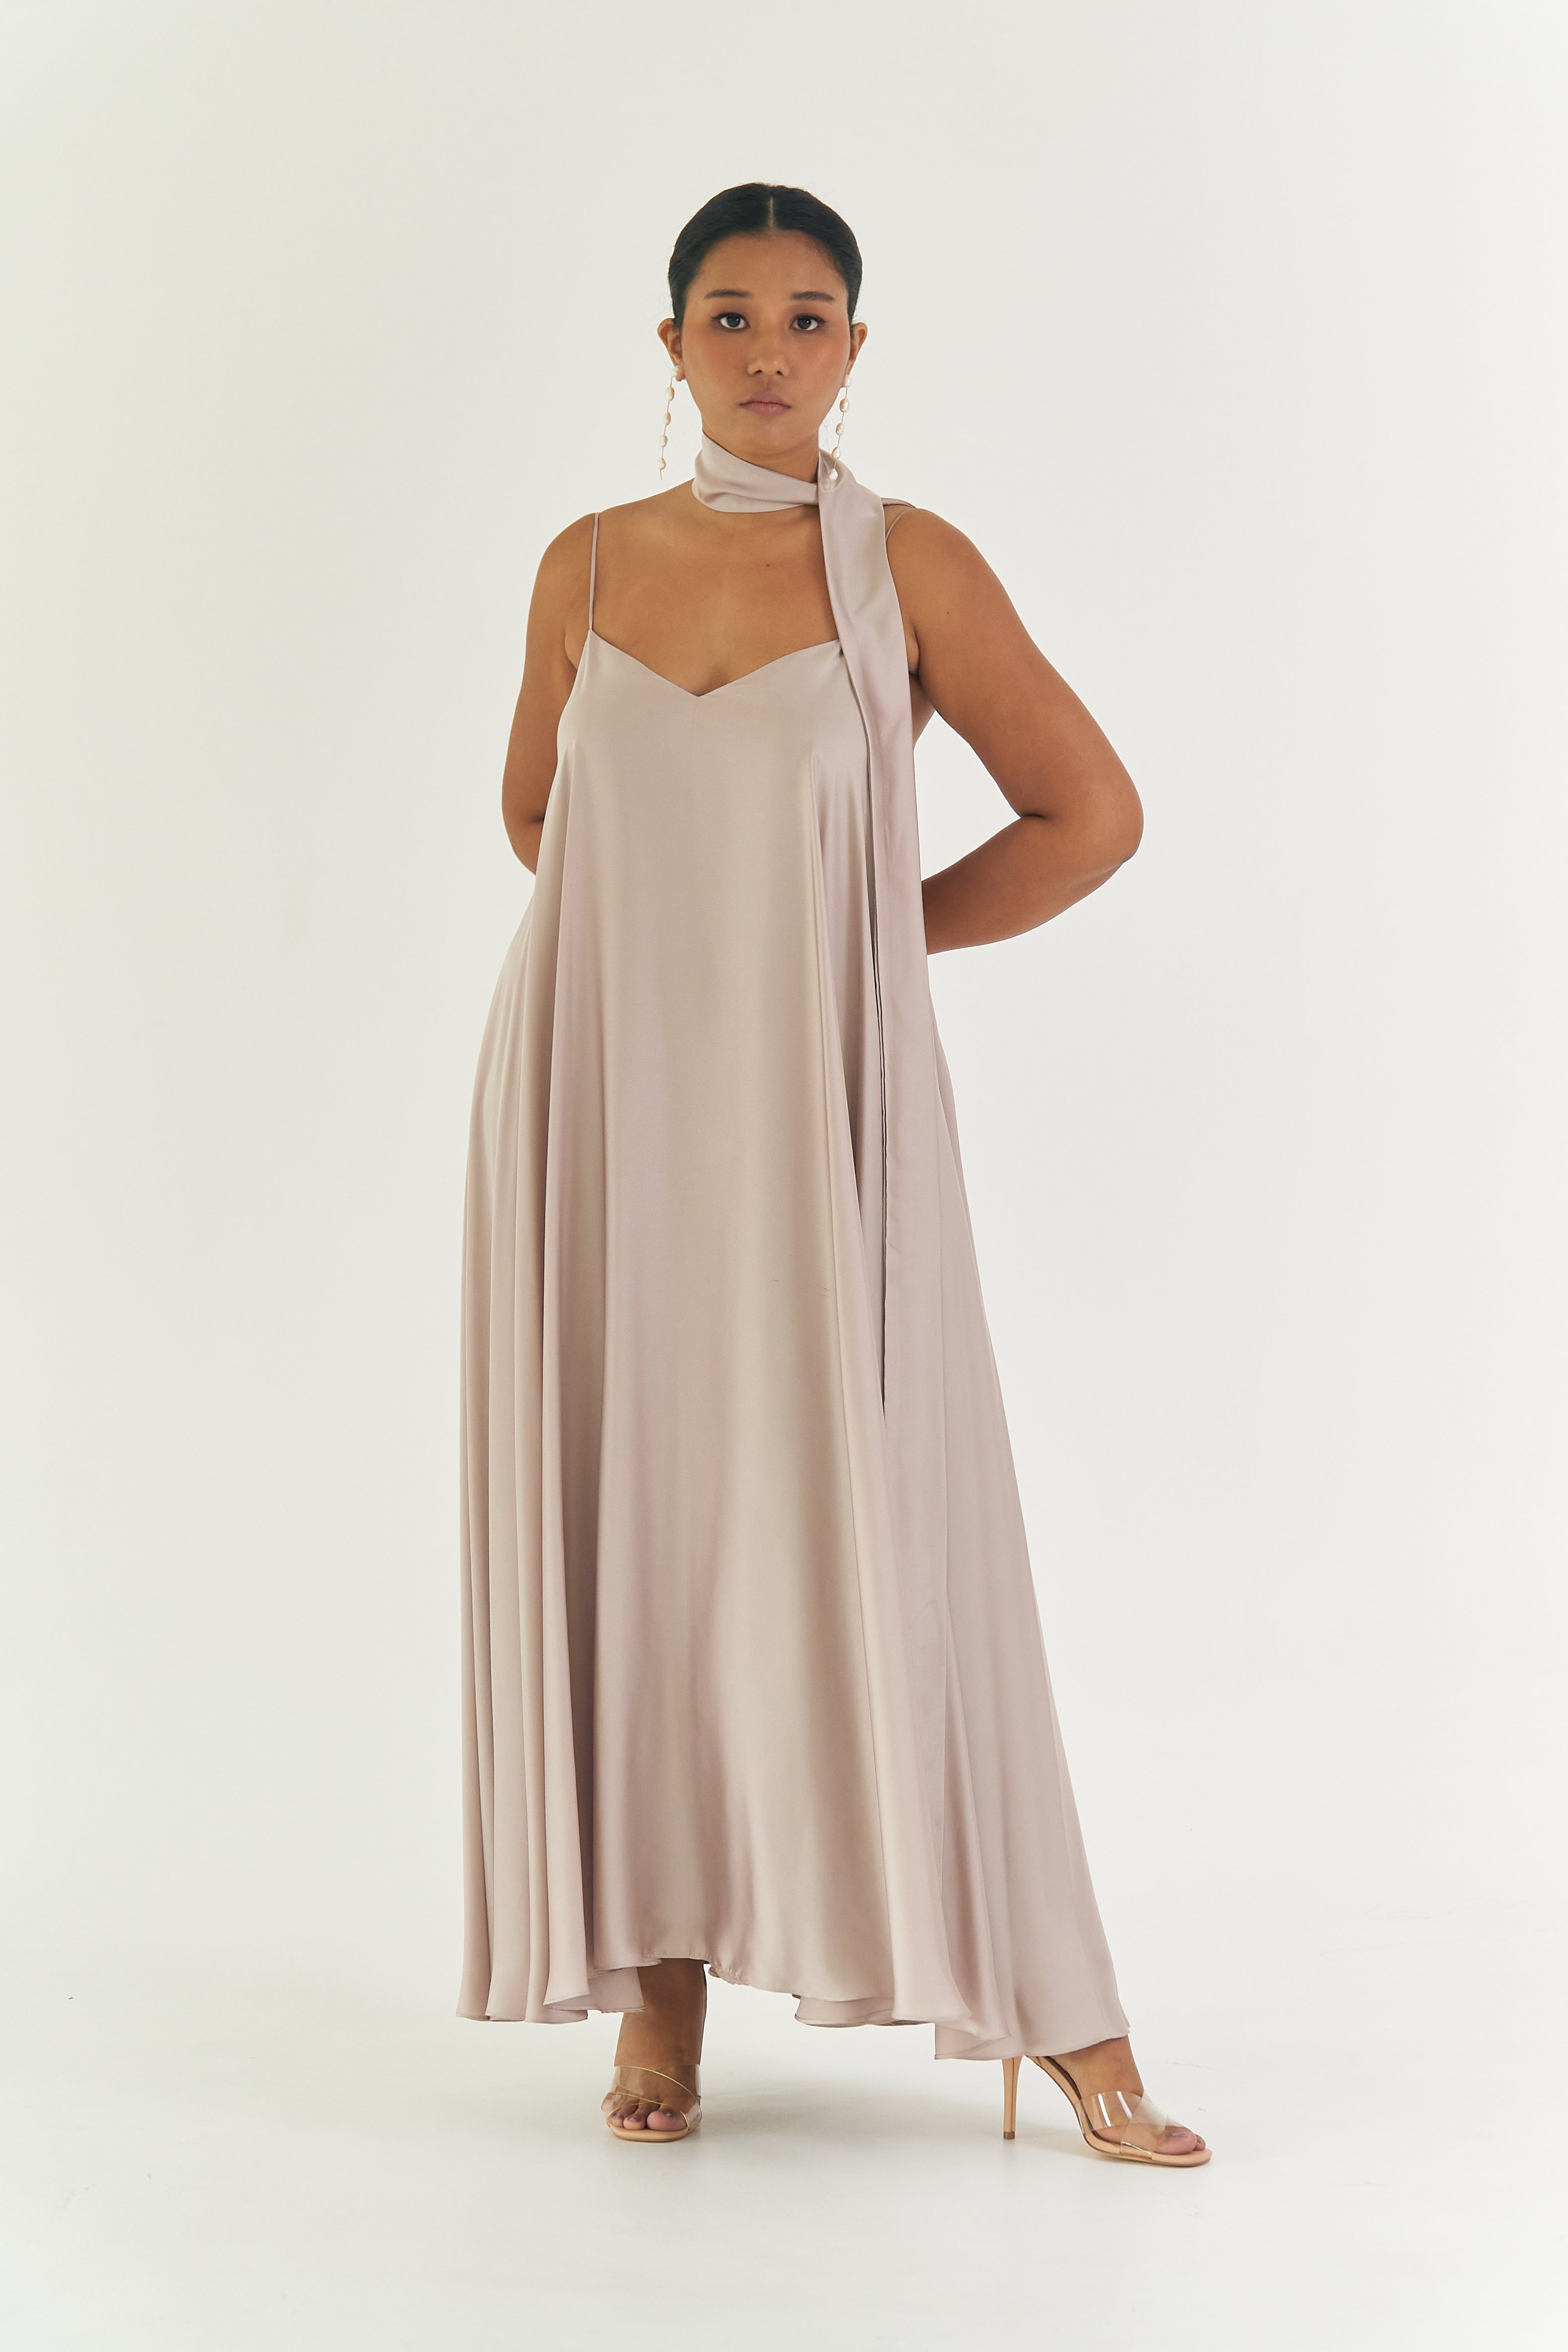 Champagne Tent Dress with Sash